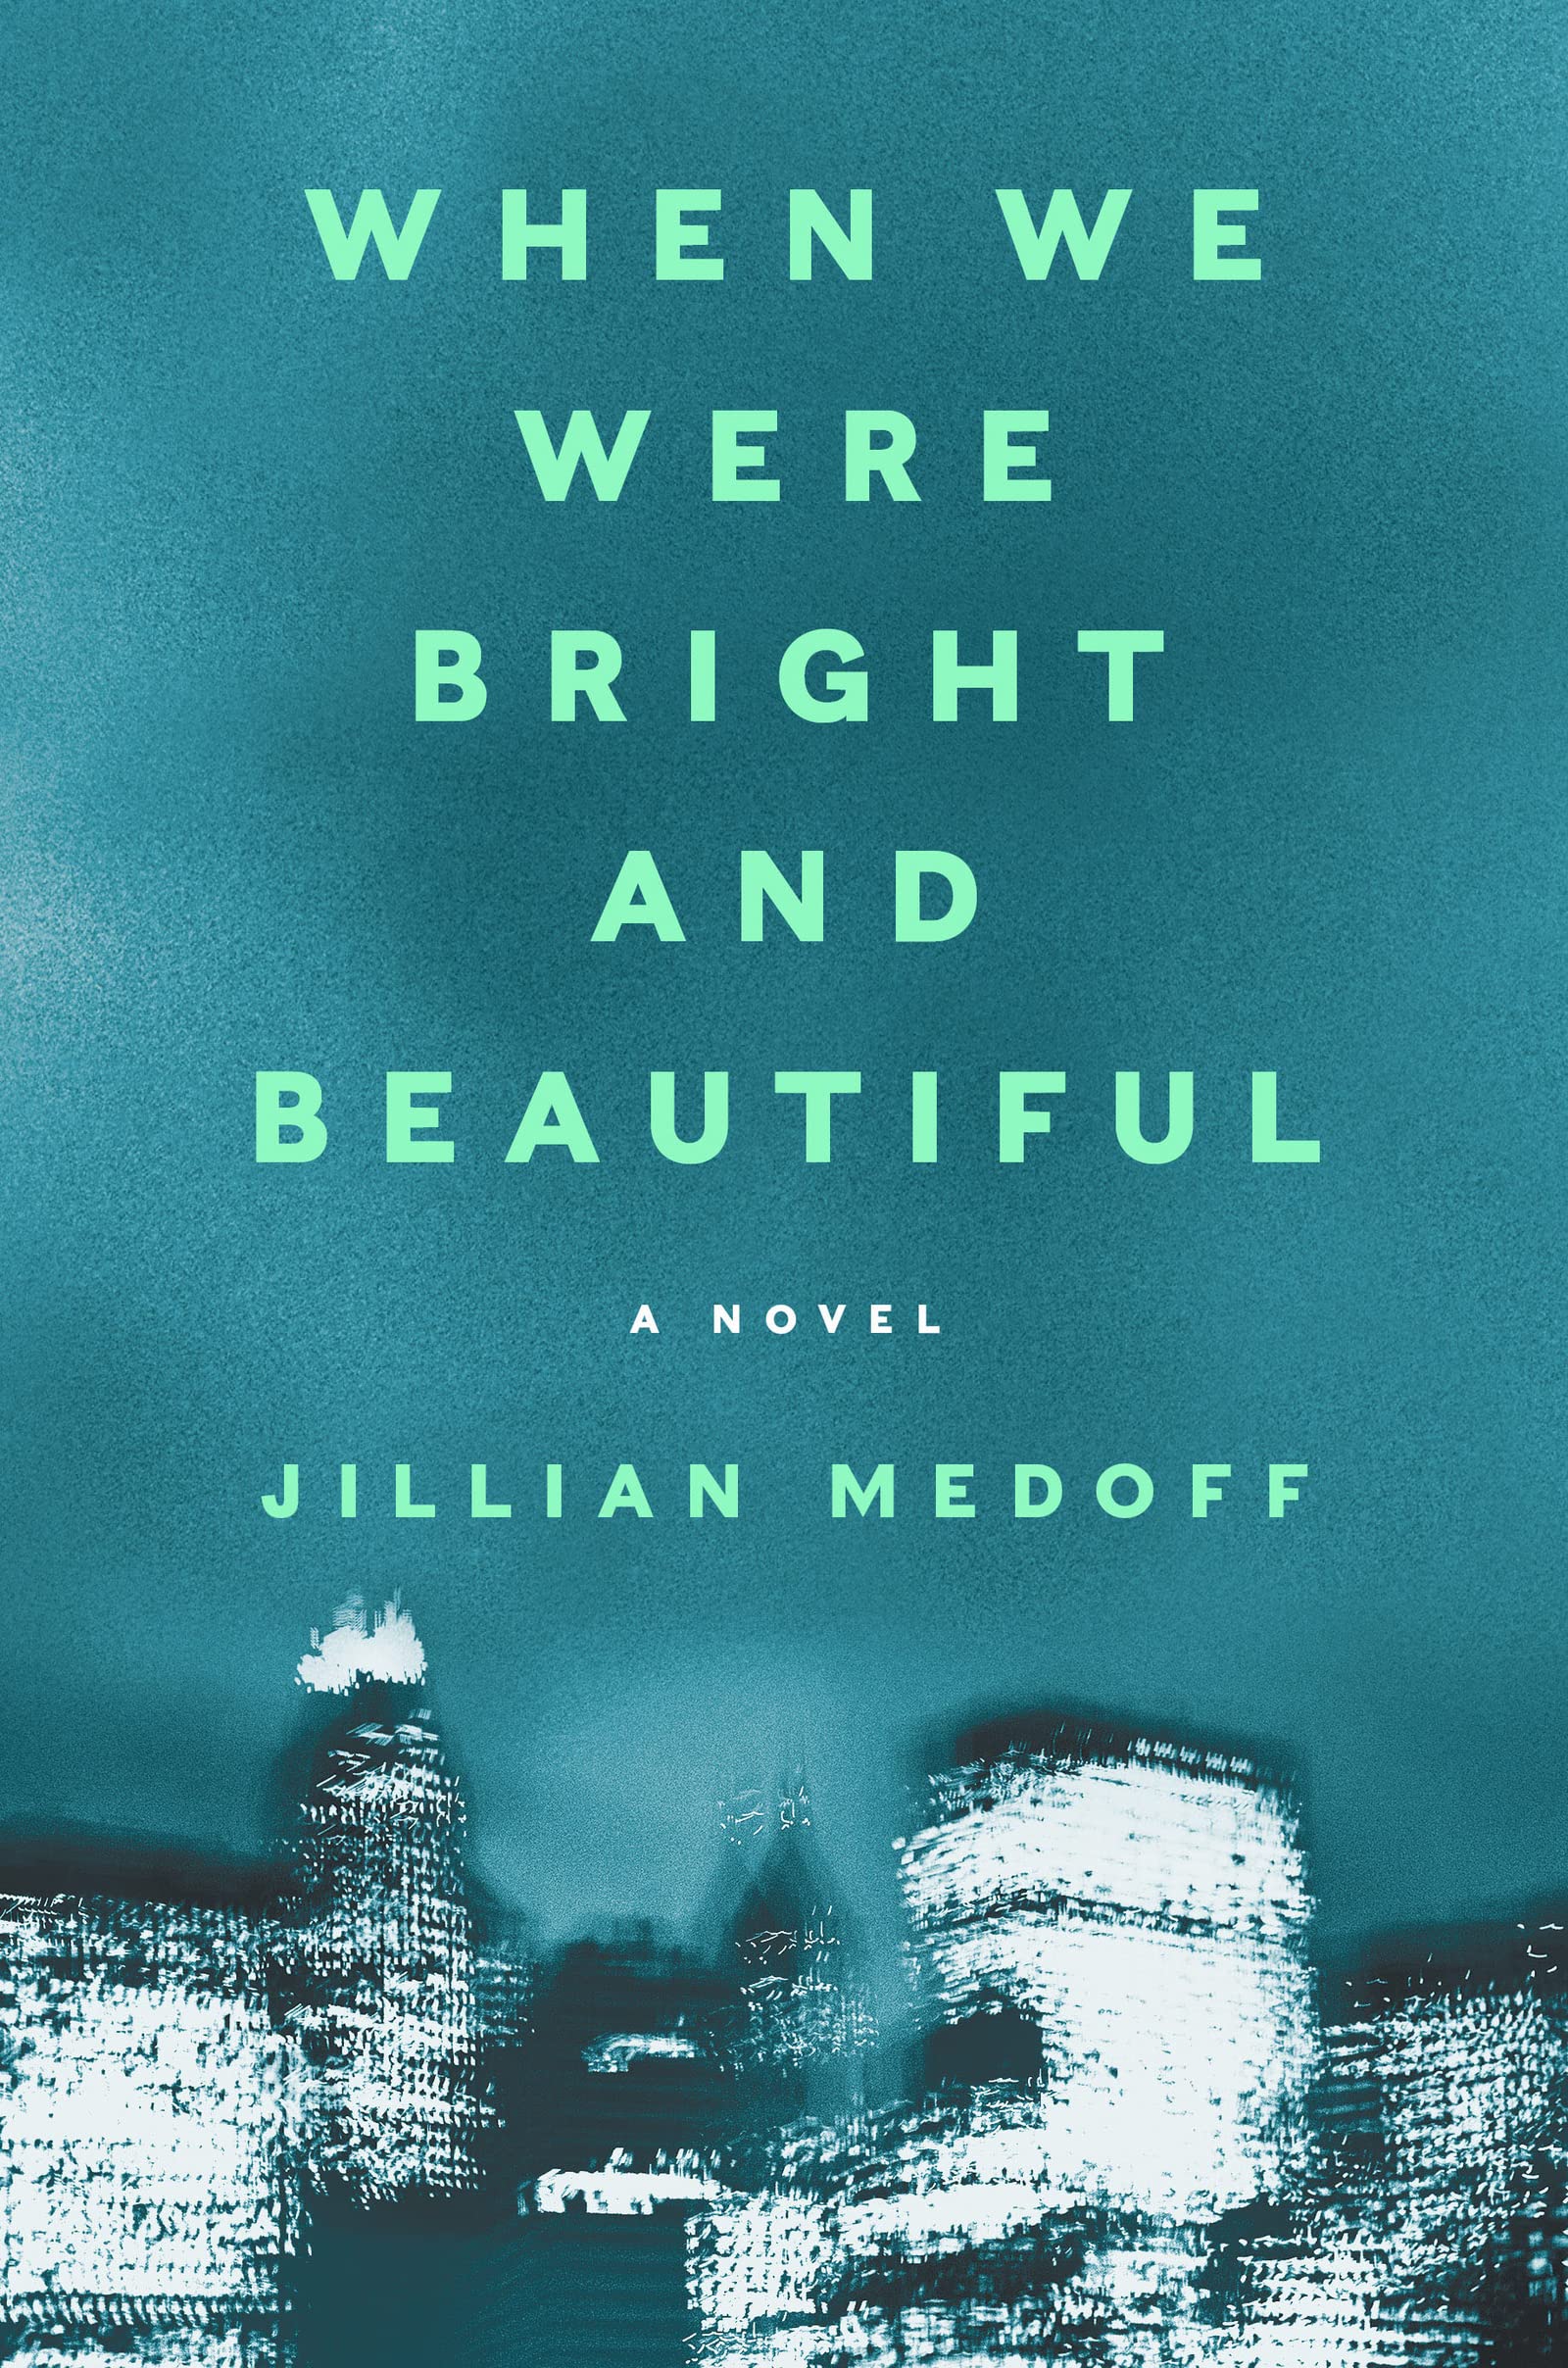 When We Were Bright and Beautiful by Jillian Medoff 2